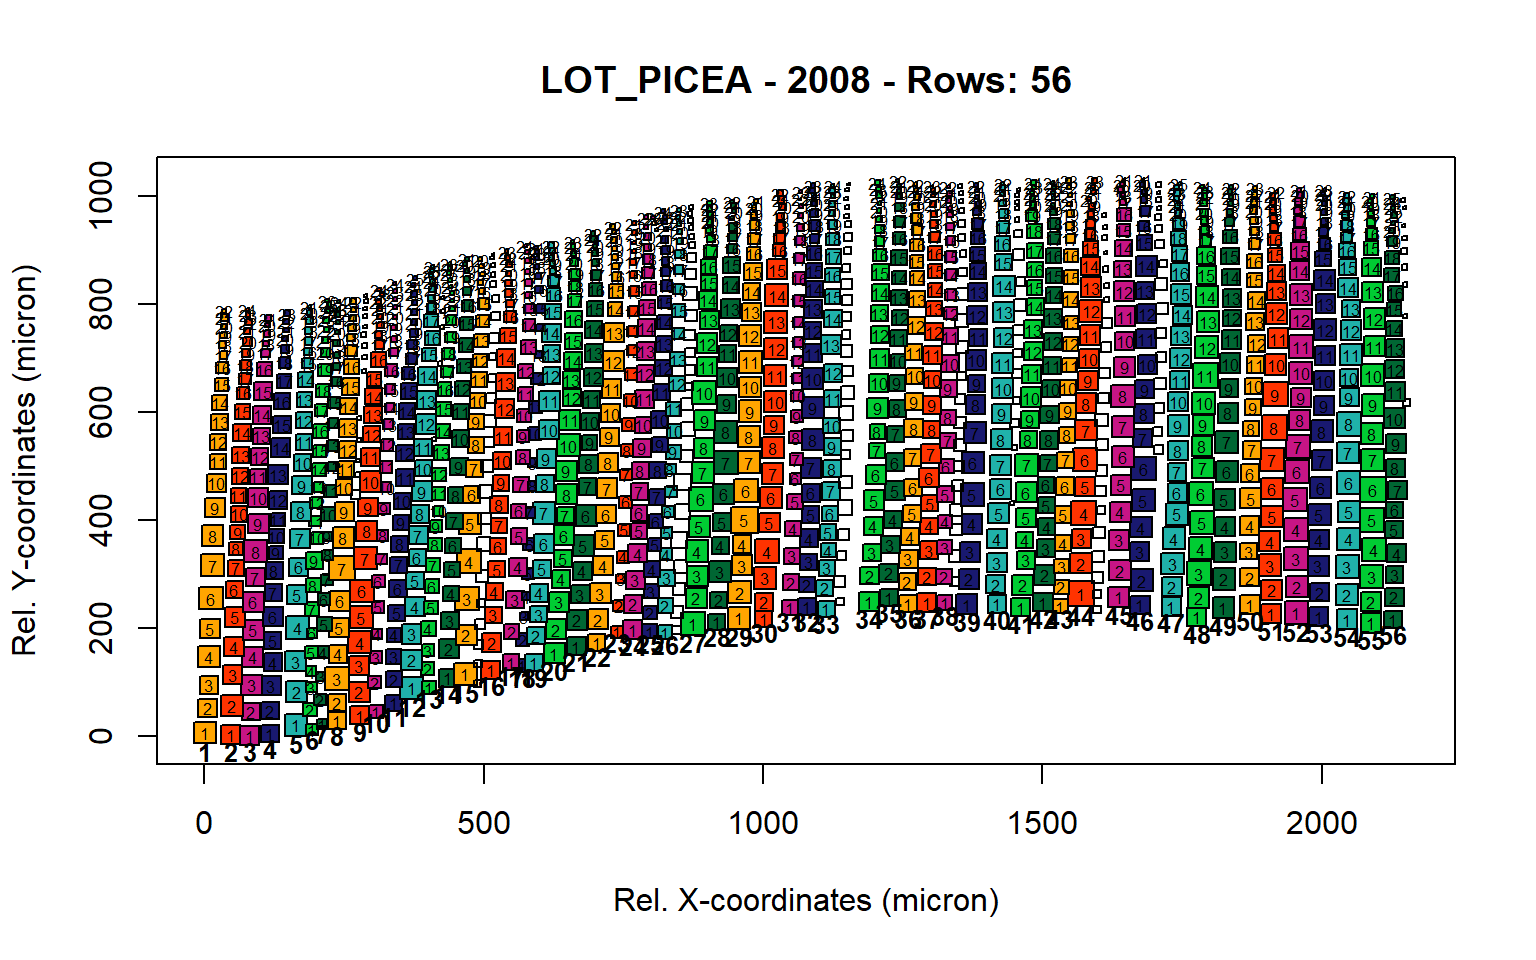 Standard plots generated by the write.output() function for Lotschental Picea abies (species="LOT_PICEA"), including 2007, 2008, 2009 and 2010.